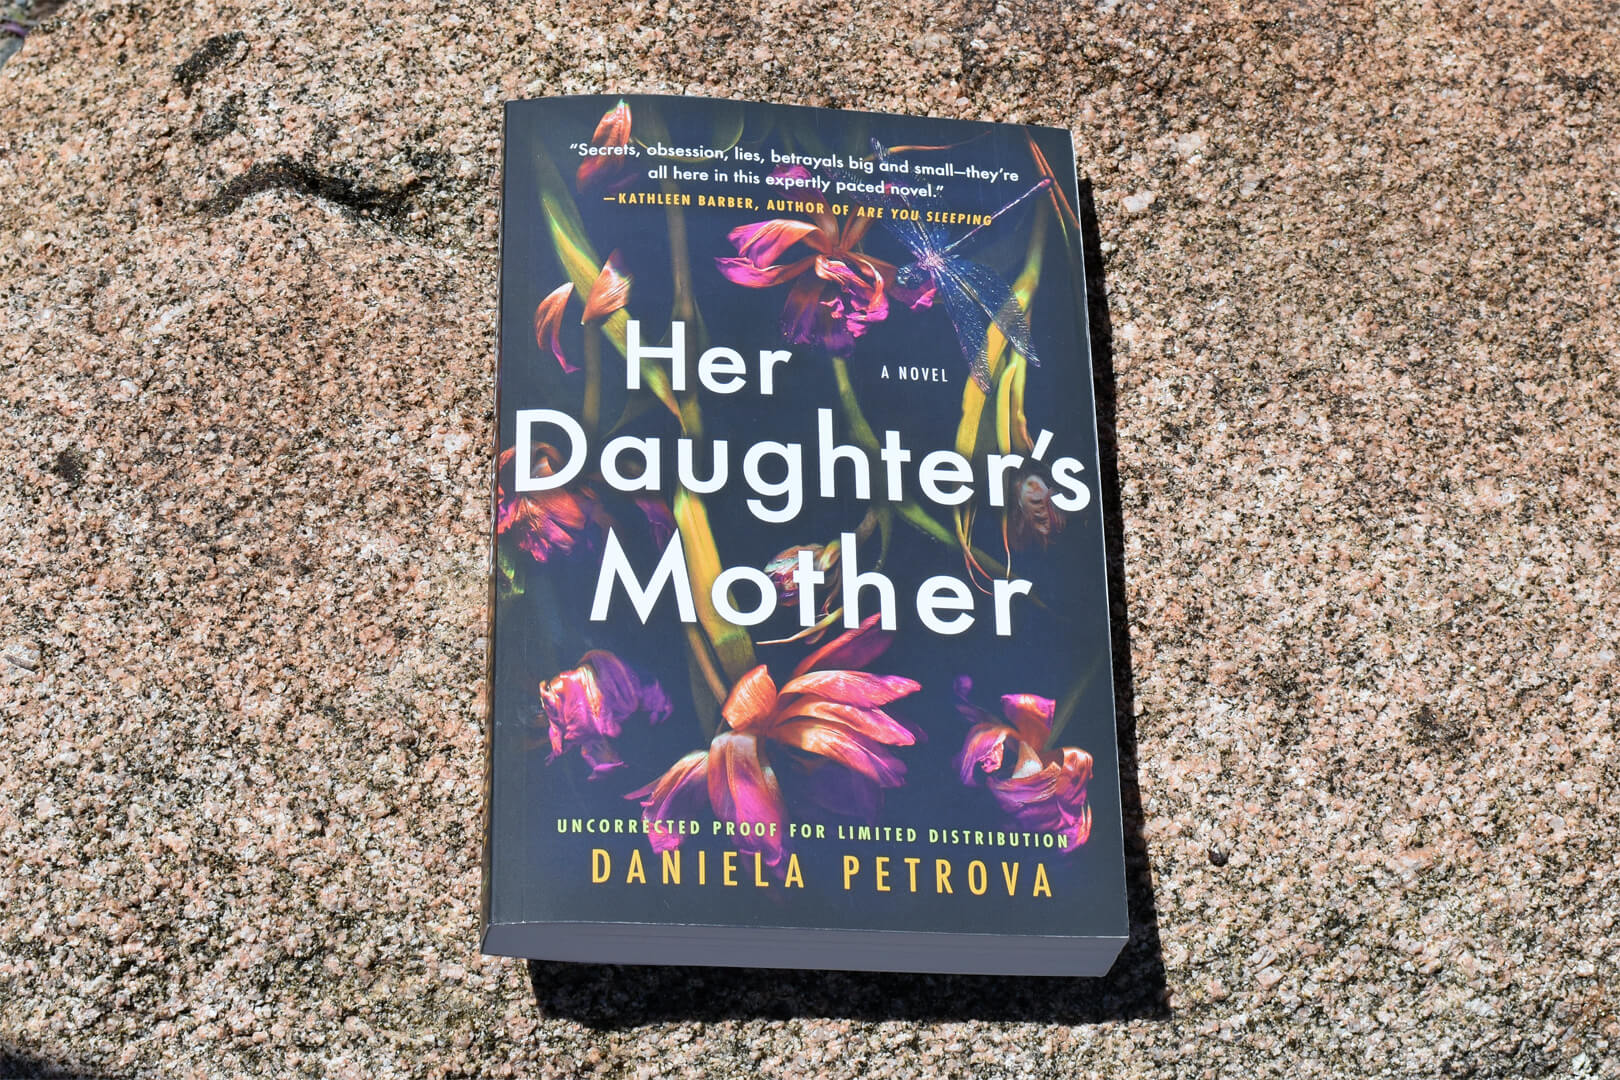 Book Club Questions for Her Daughter’s Mother by Daniela Petrova